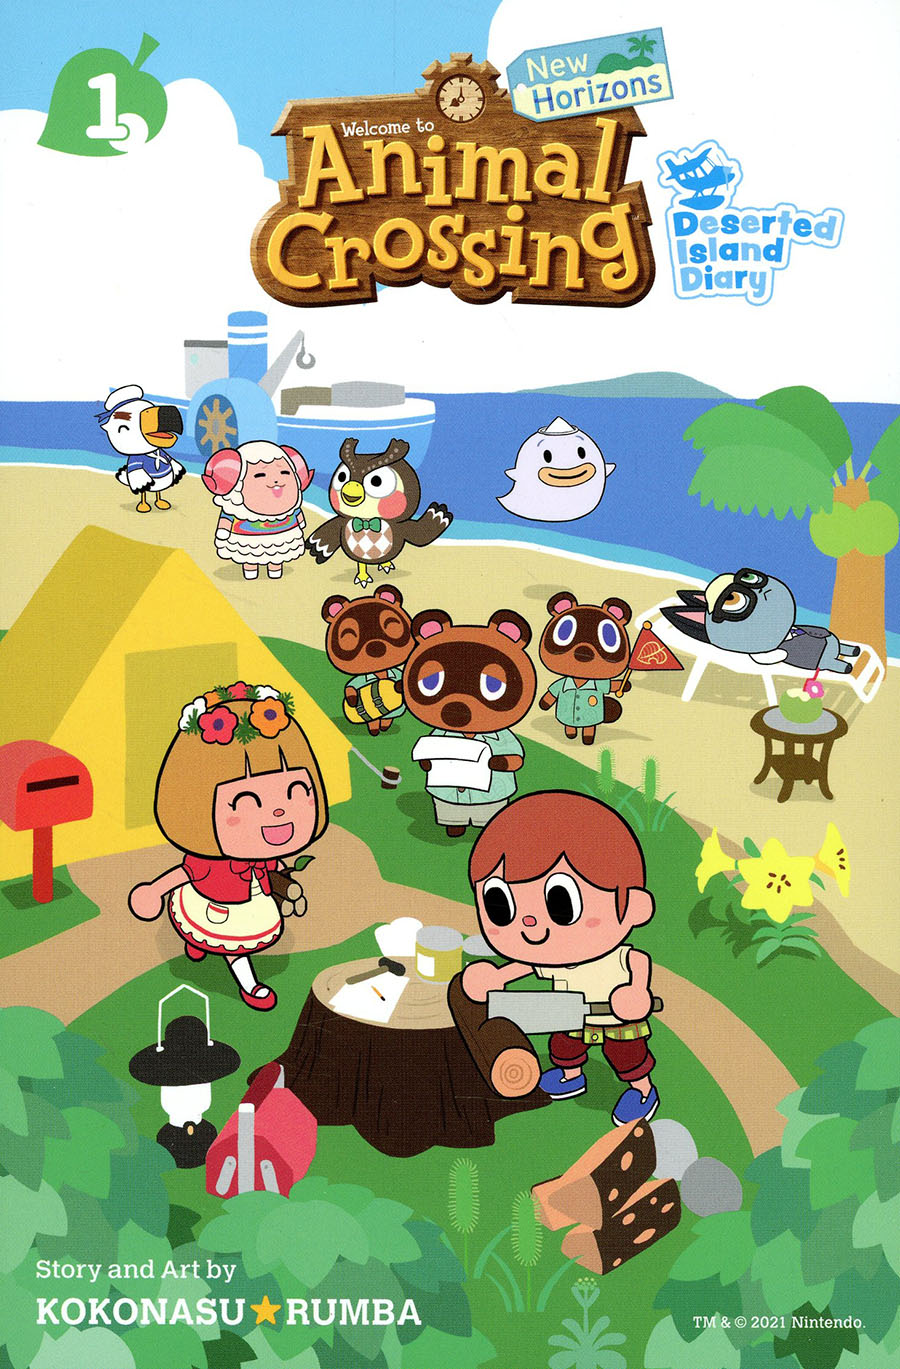 Animal Crossing New Horizons Deserted Island Diary Vol 1 GN